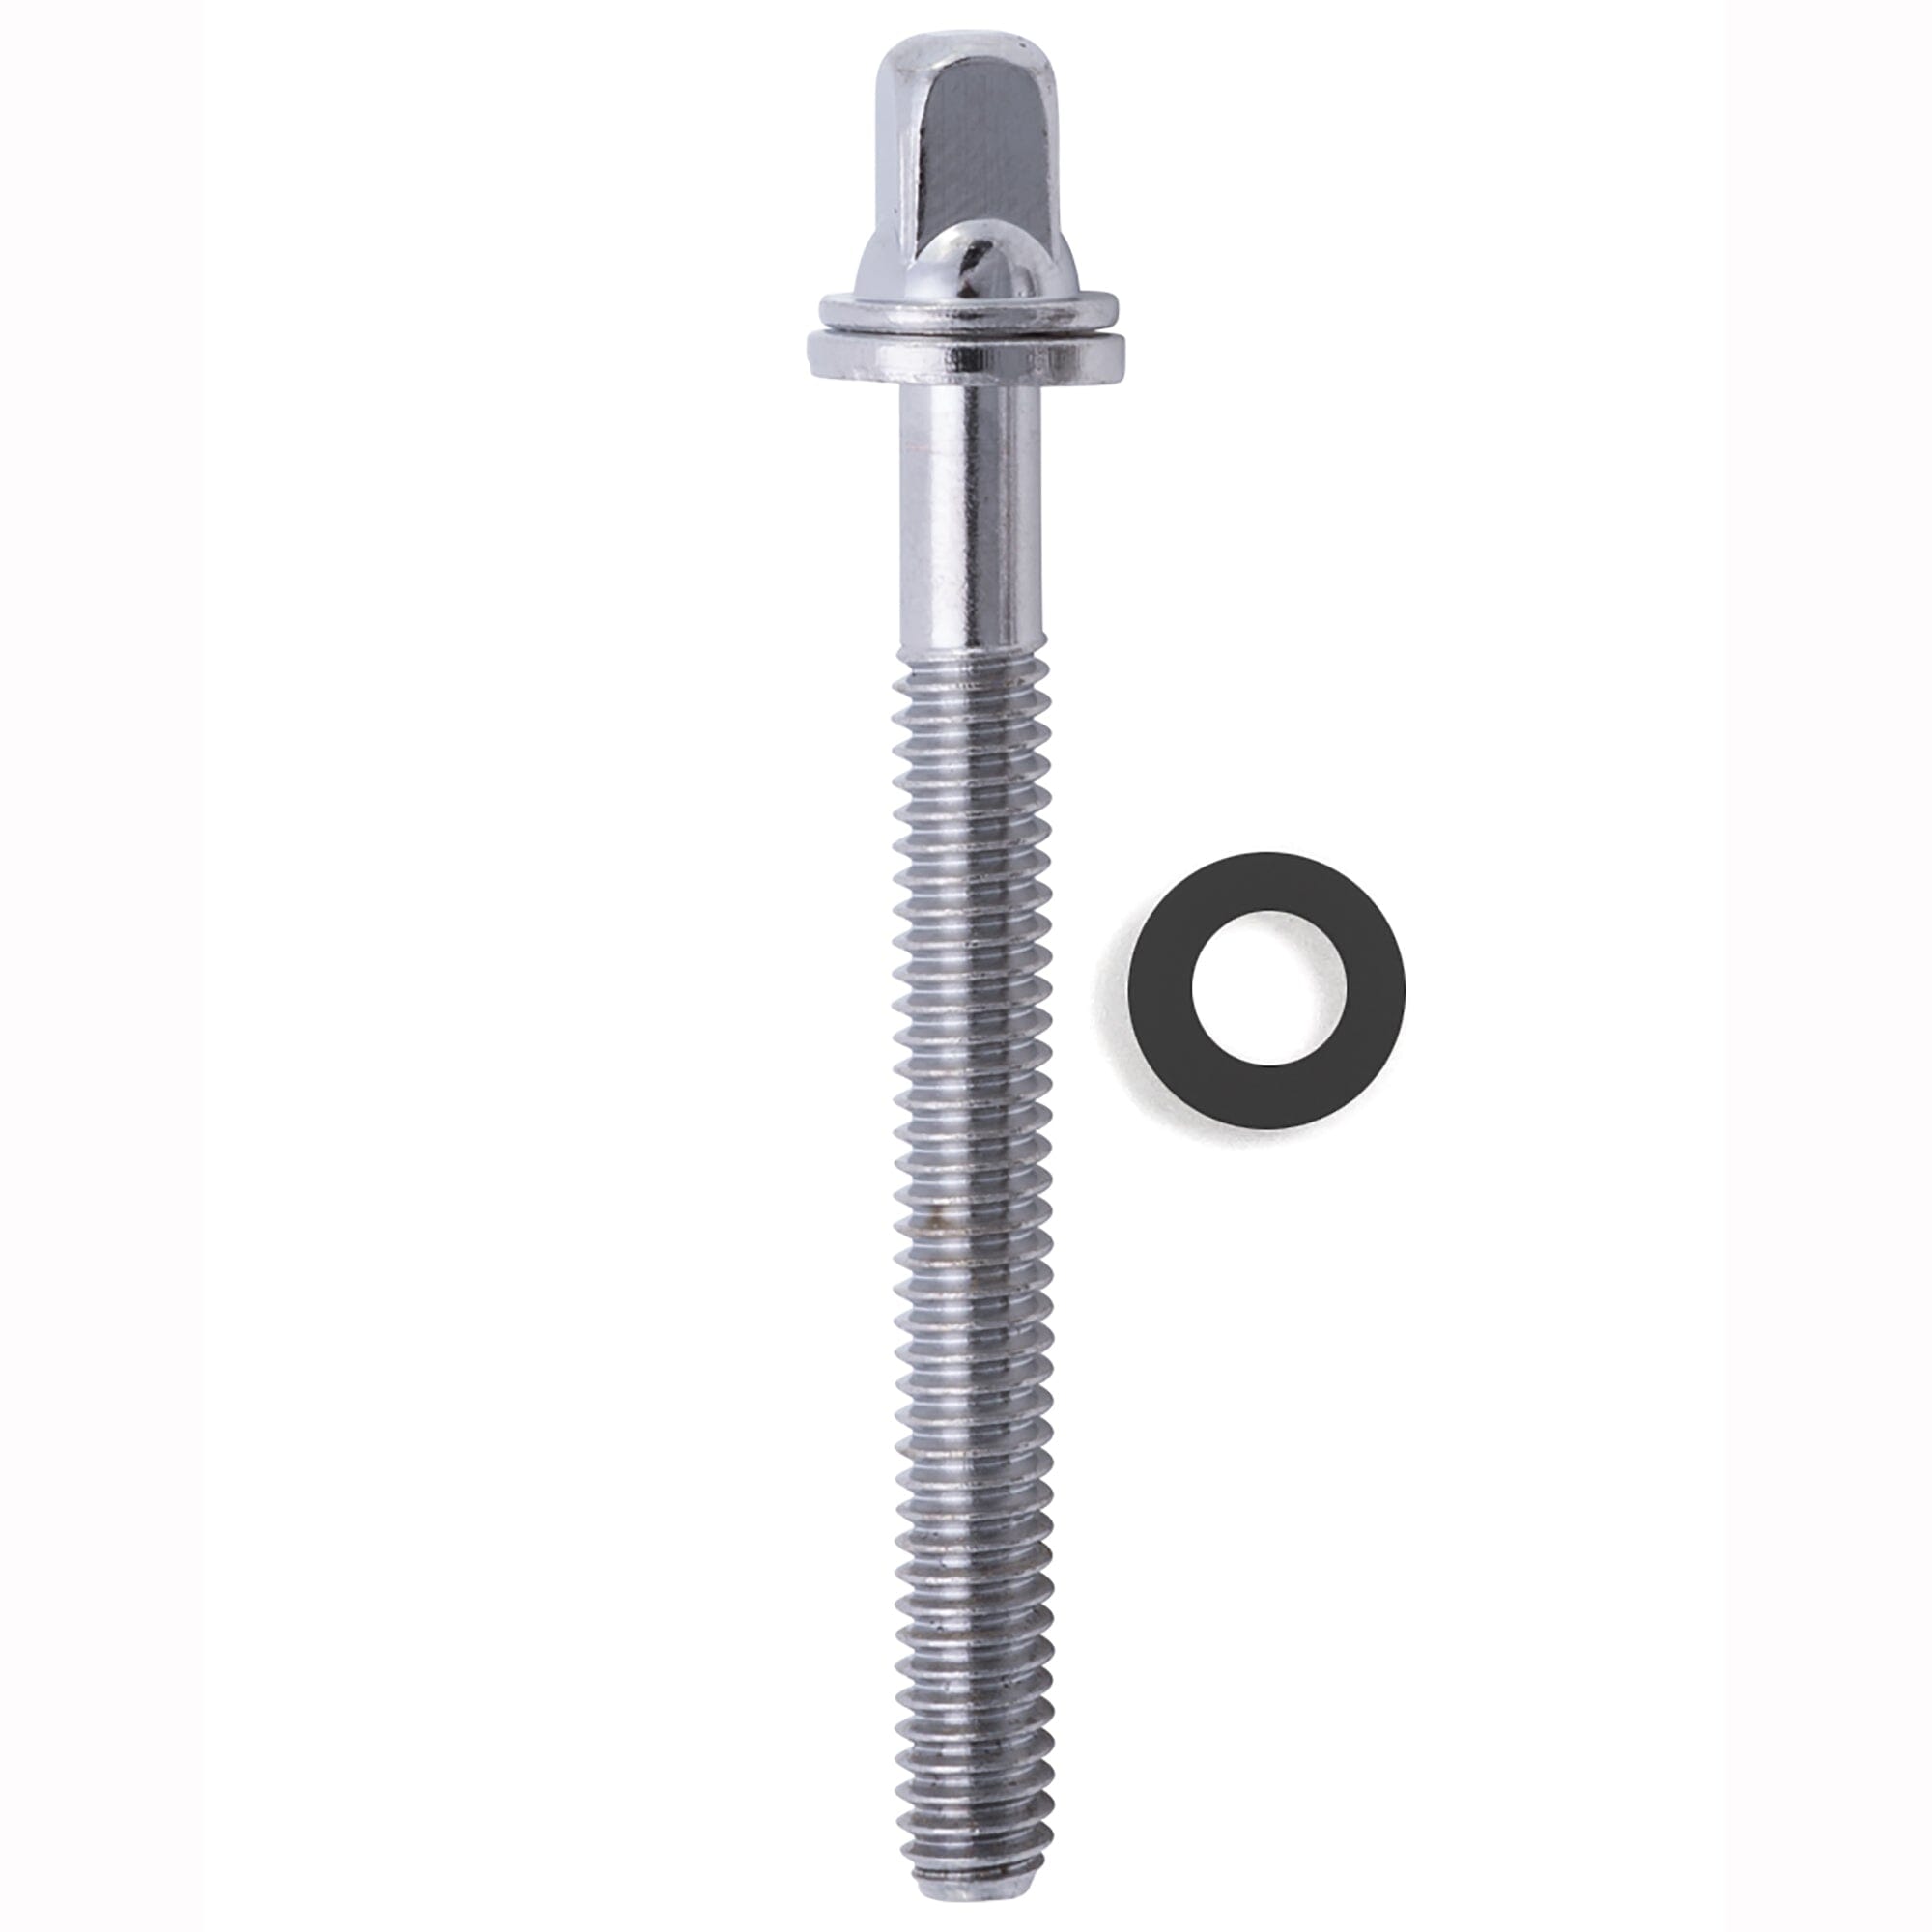 Rogers 2-1/2" Tension Rods w/ captive washer & ABS washer, 20-pack (9358) NEW DRUM ACCESSORIES Rogers 